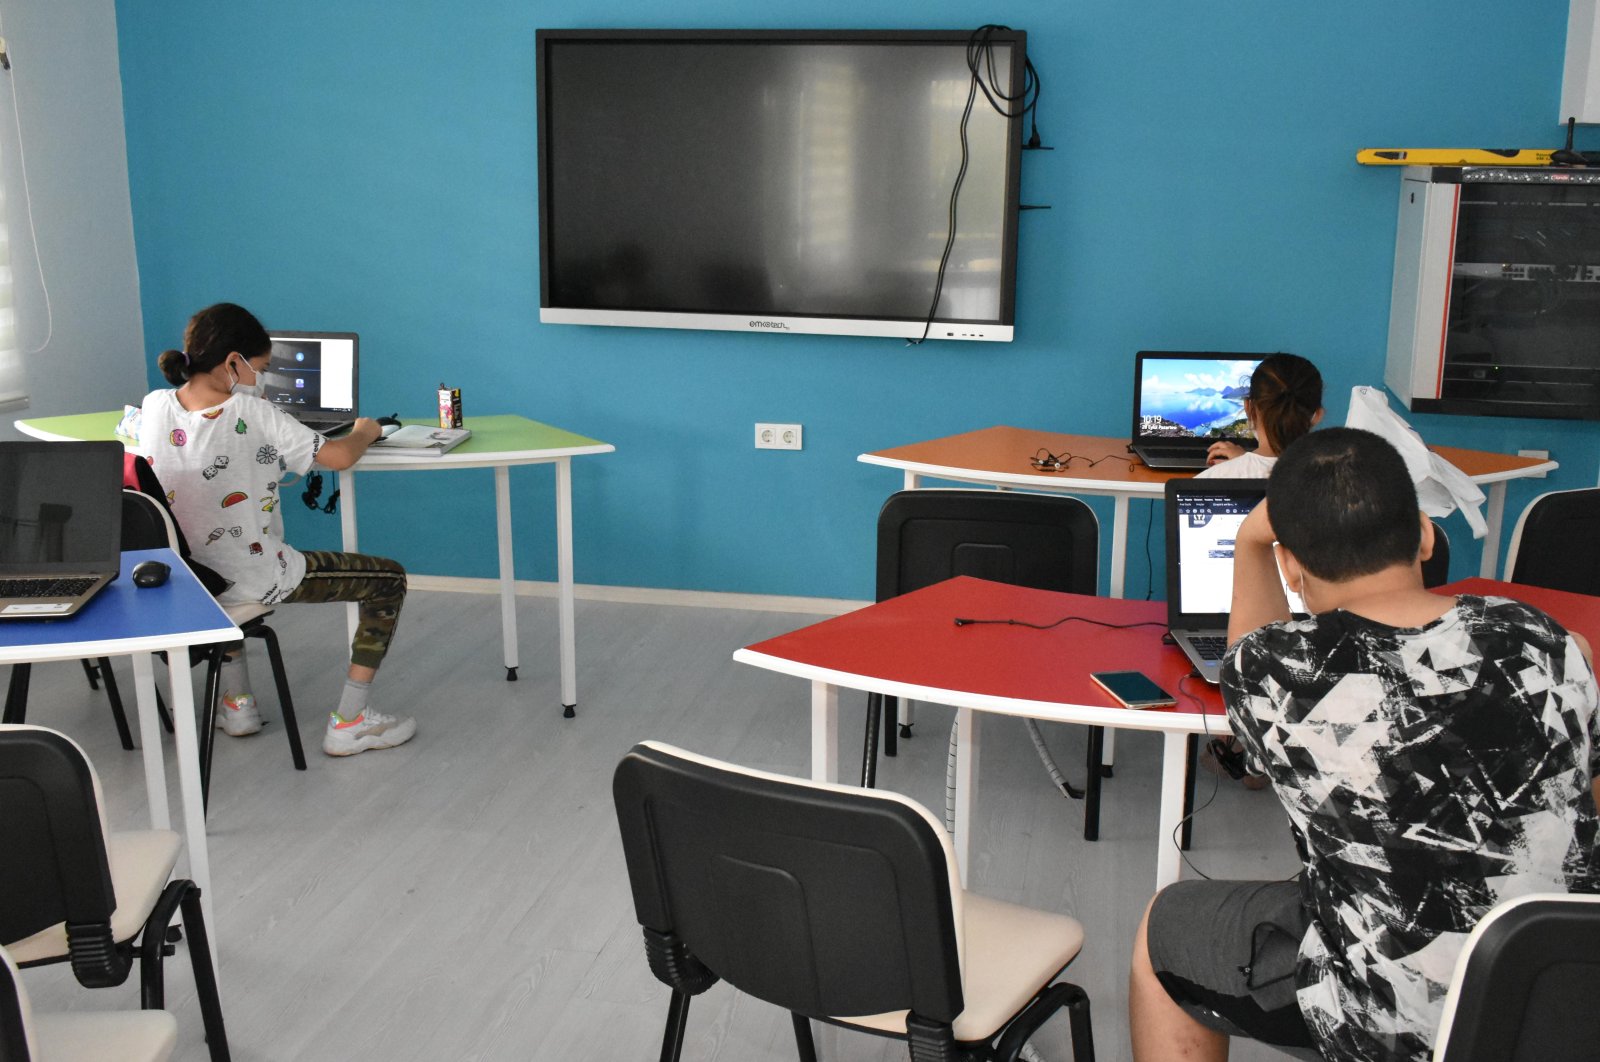 Students participate in online education at a municipality center in the Balçova district of western Izmir, Turkey, Sept. 28, 2020. (IHA Photo)